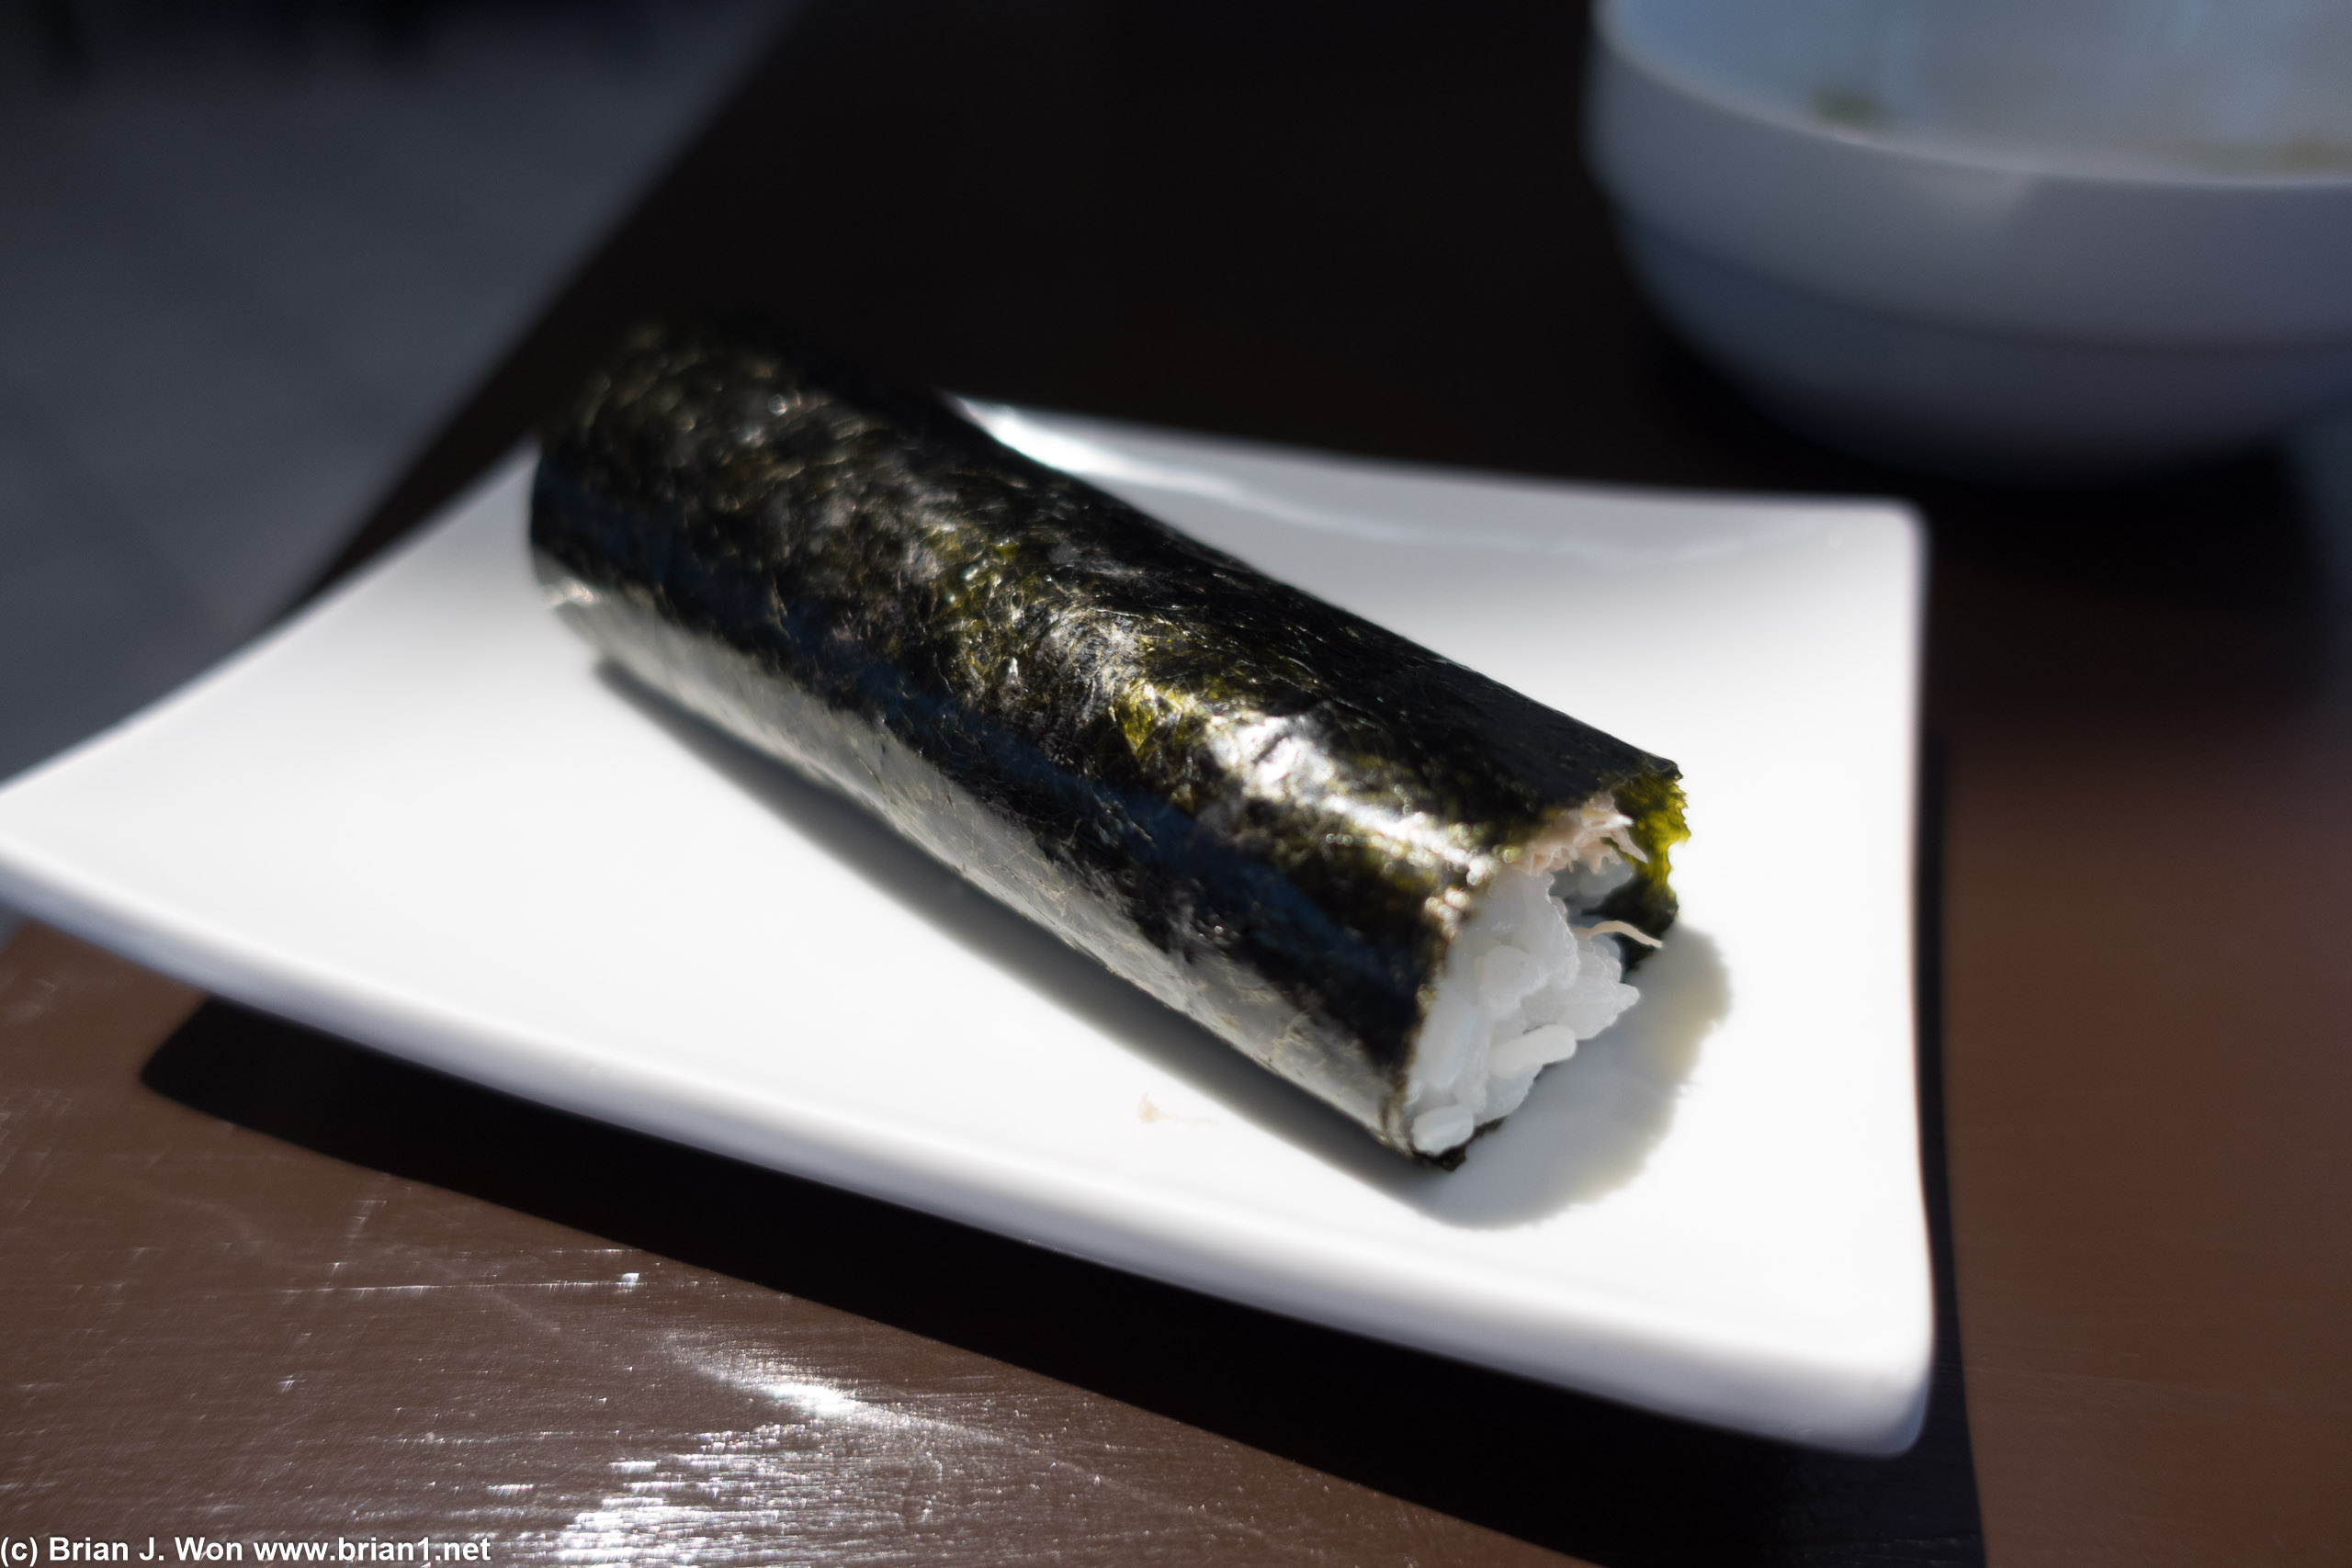 Blue crab hand roll. Nothing exciting but a nice finishing piece.